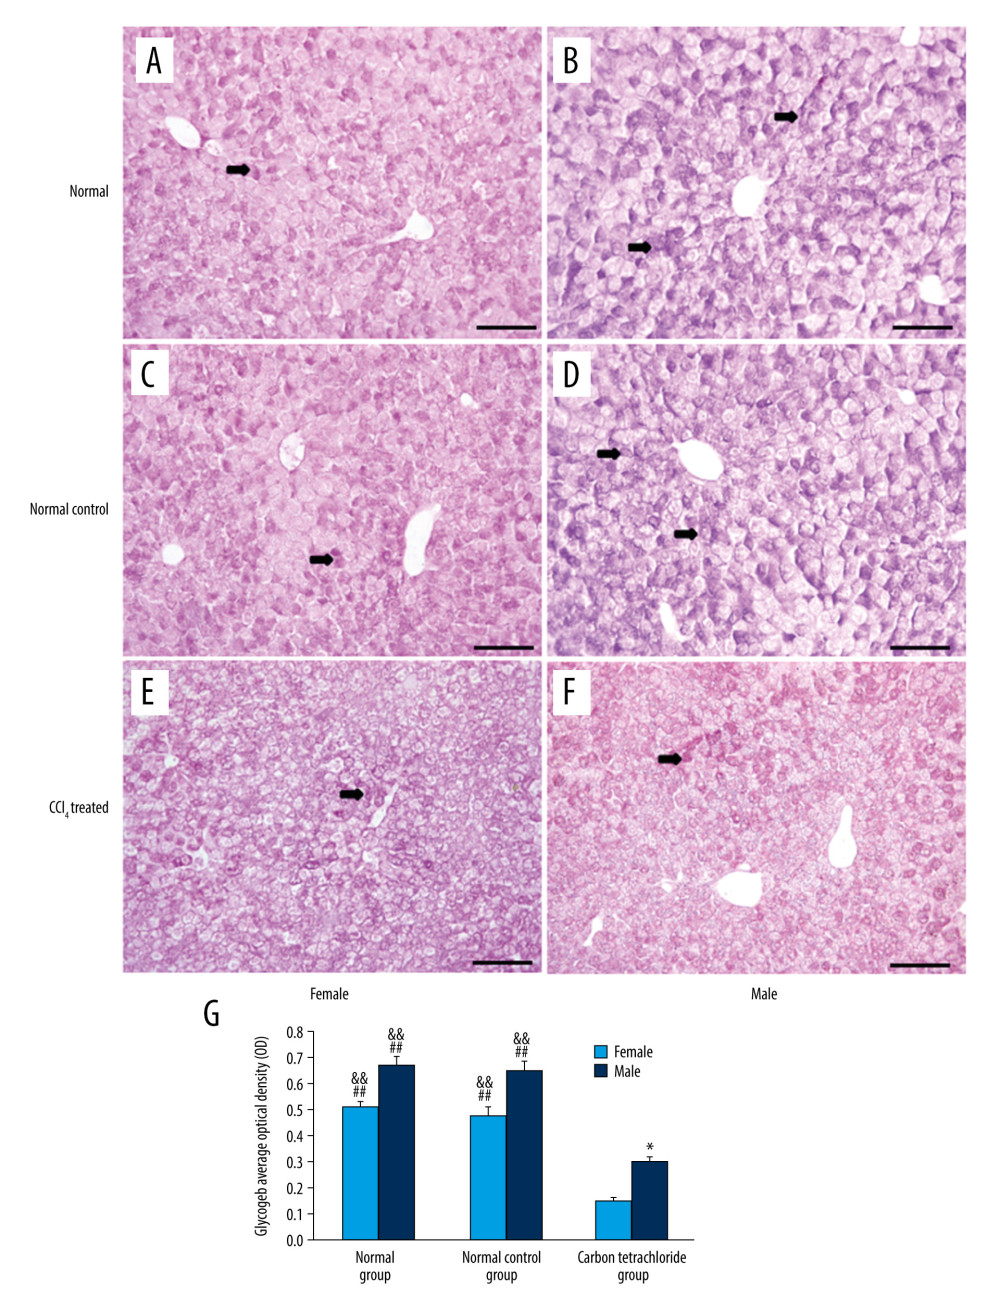 Detection of glycogen expression by periodic acid Schiff reagent staining (PAS staining) assay of staining at 24 h after intraperitoneal injection of CCl4. (A–F) Liver PAS staining of the female normal group, the male normal group, the female normal control group, the male normal control group, the female CCl4 group, and the male CCl4 group, respectively. (G) Uniform white balance processing, two-color segmentation, and optical density analysis using Motic Images Advanced 3.2 software. At least 12 mm2 of liver tissue sections were tested for each mouse. ** P<0.05: there was a significant difference between the female group and the male group. ## P<0.01: there was a significant difference between the female CCl4 group and the normal group or the normal control group. && P<0.01: there was a significant difference between the male CCl4 group and the normal group or the normal control group. Experiments were repeated in triplicate (scale bar, 50 μm). PAS – periodic acid-Schiff.